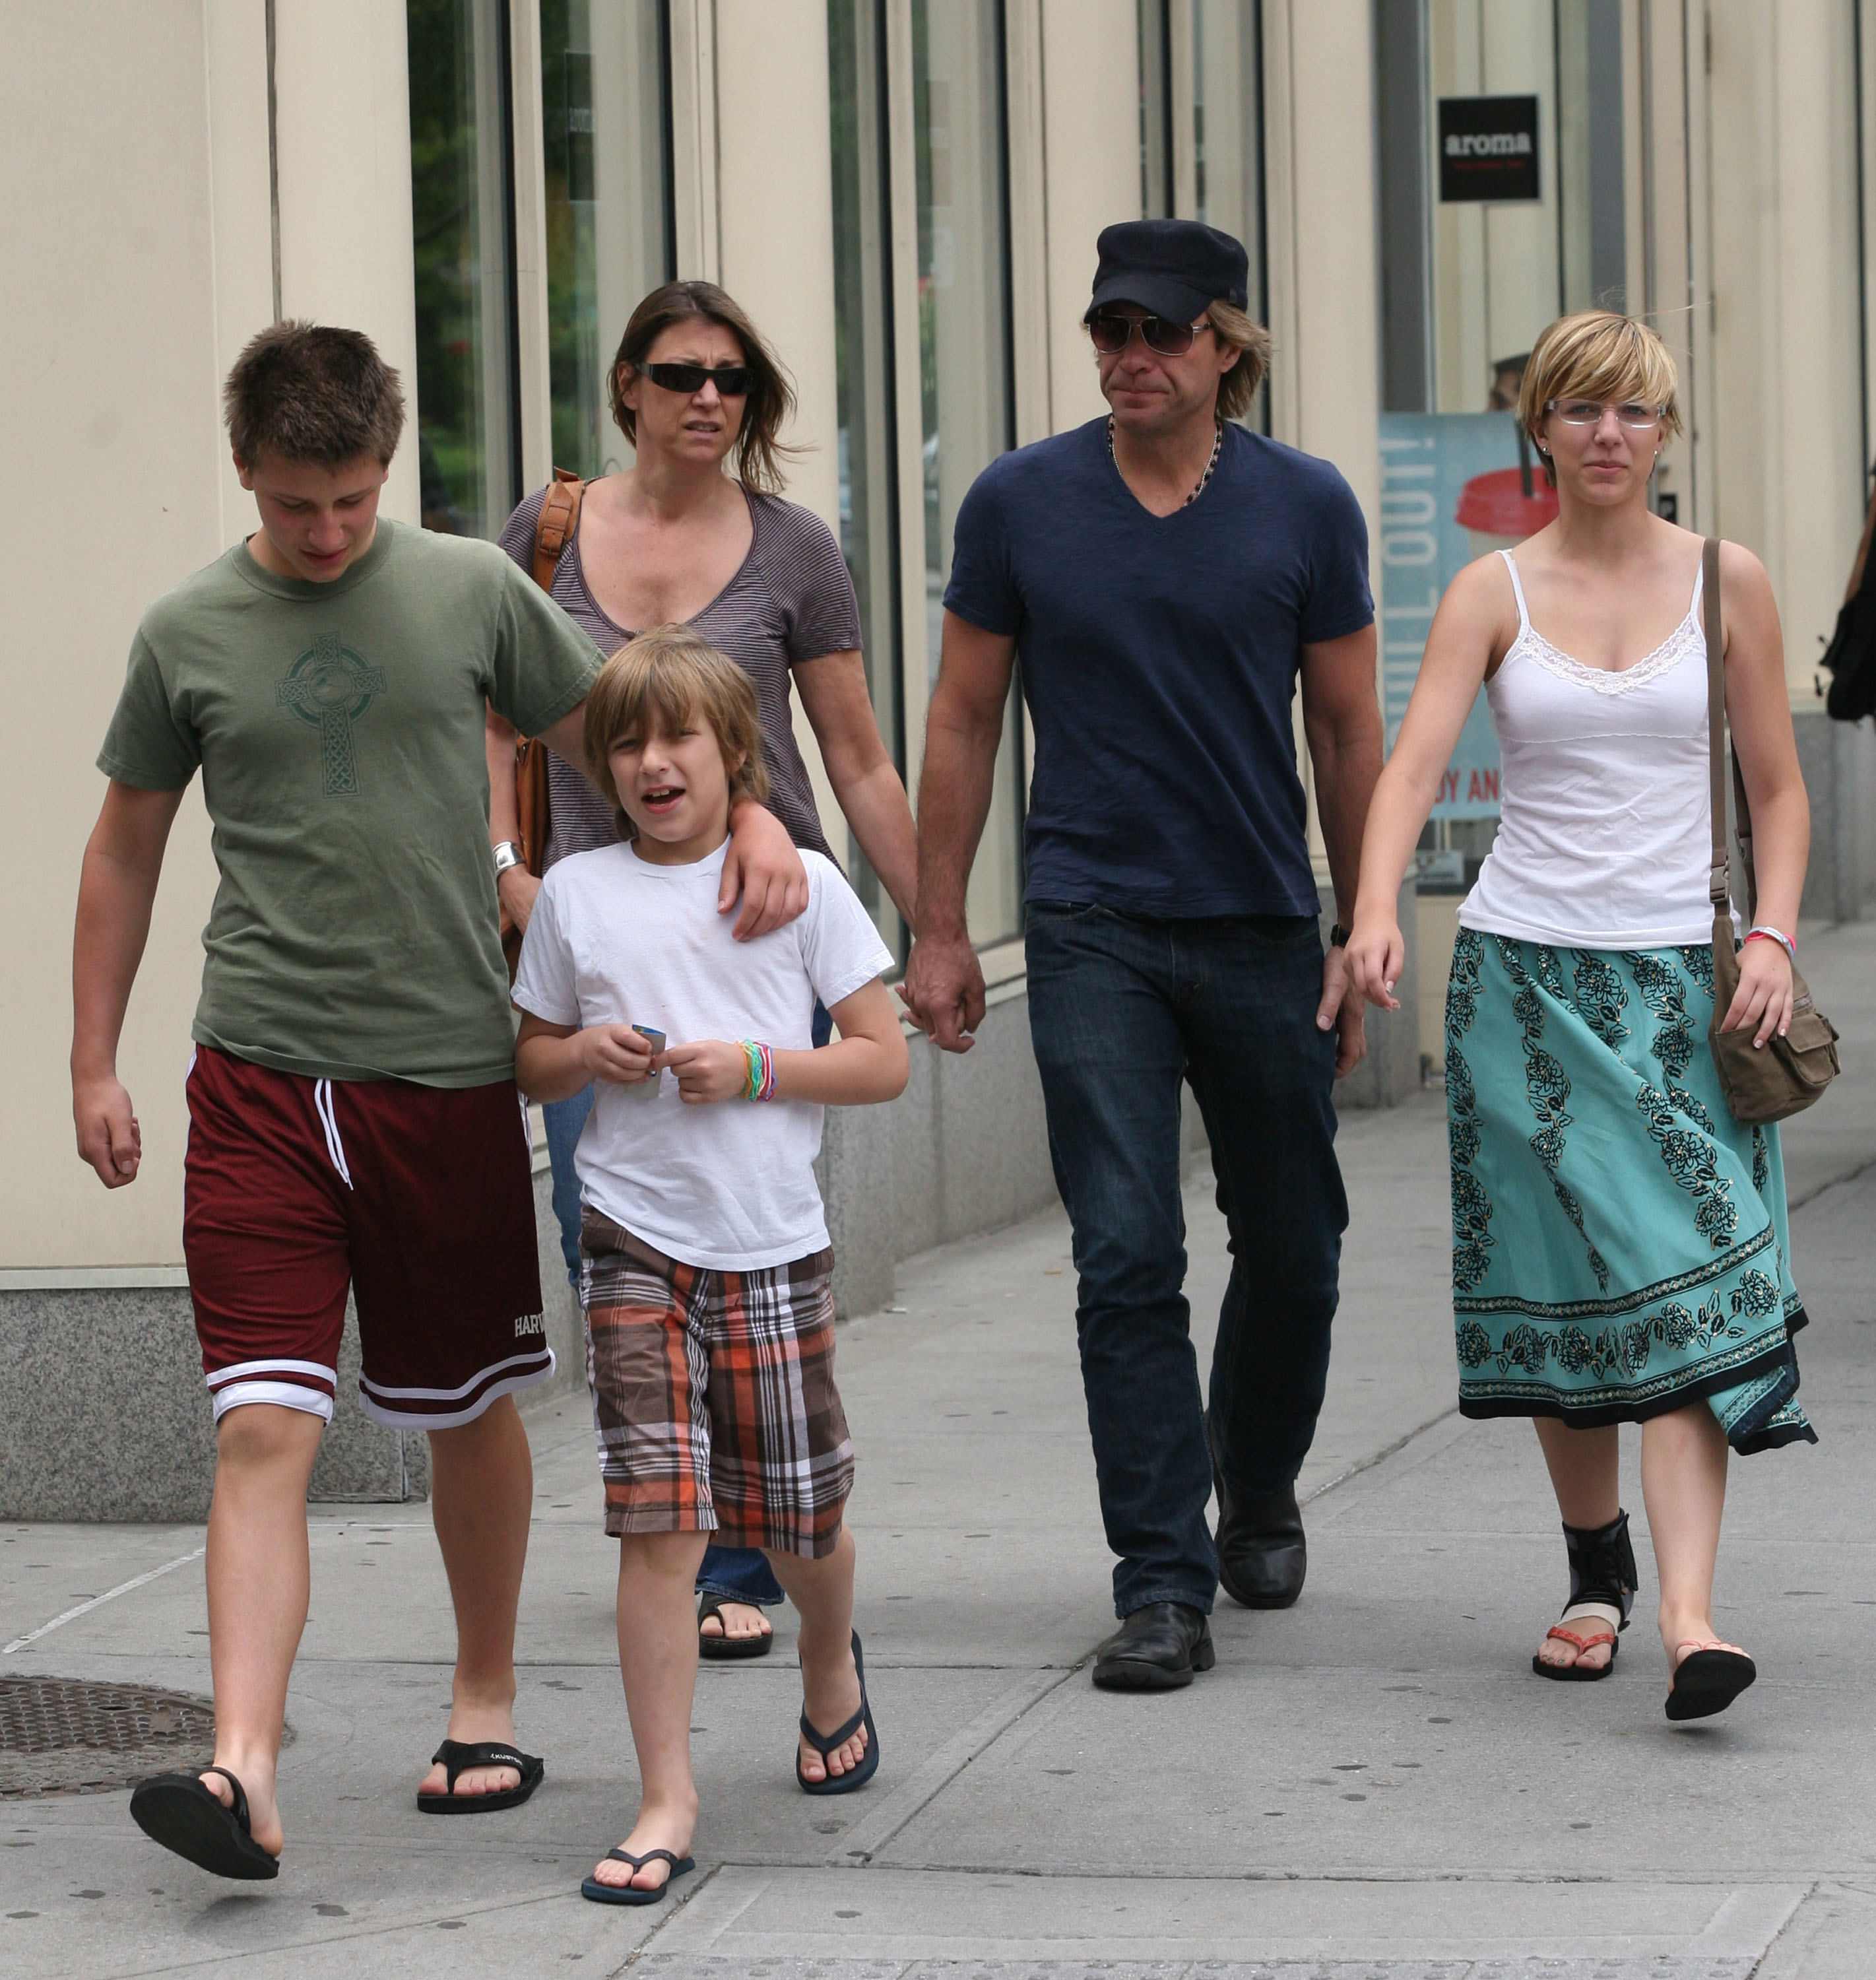 Jon Bon Jovi and his wife, Dorothea Hurley, with their kids Jesse, Jacob, and Stephanie in 2010 in New York | Source: Getty Images